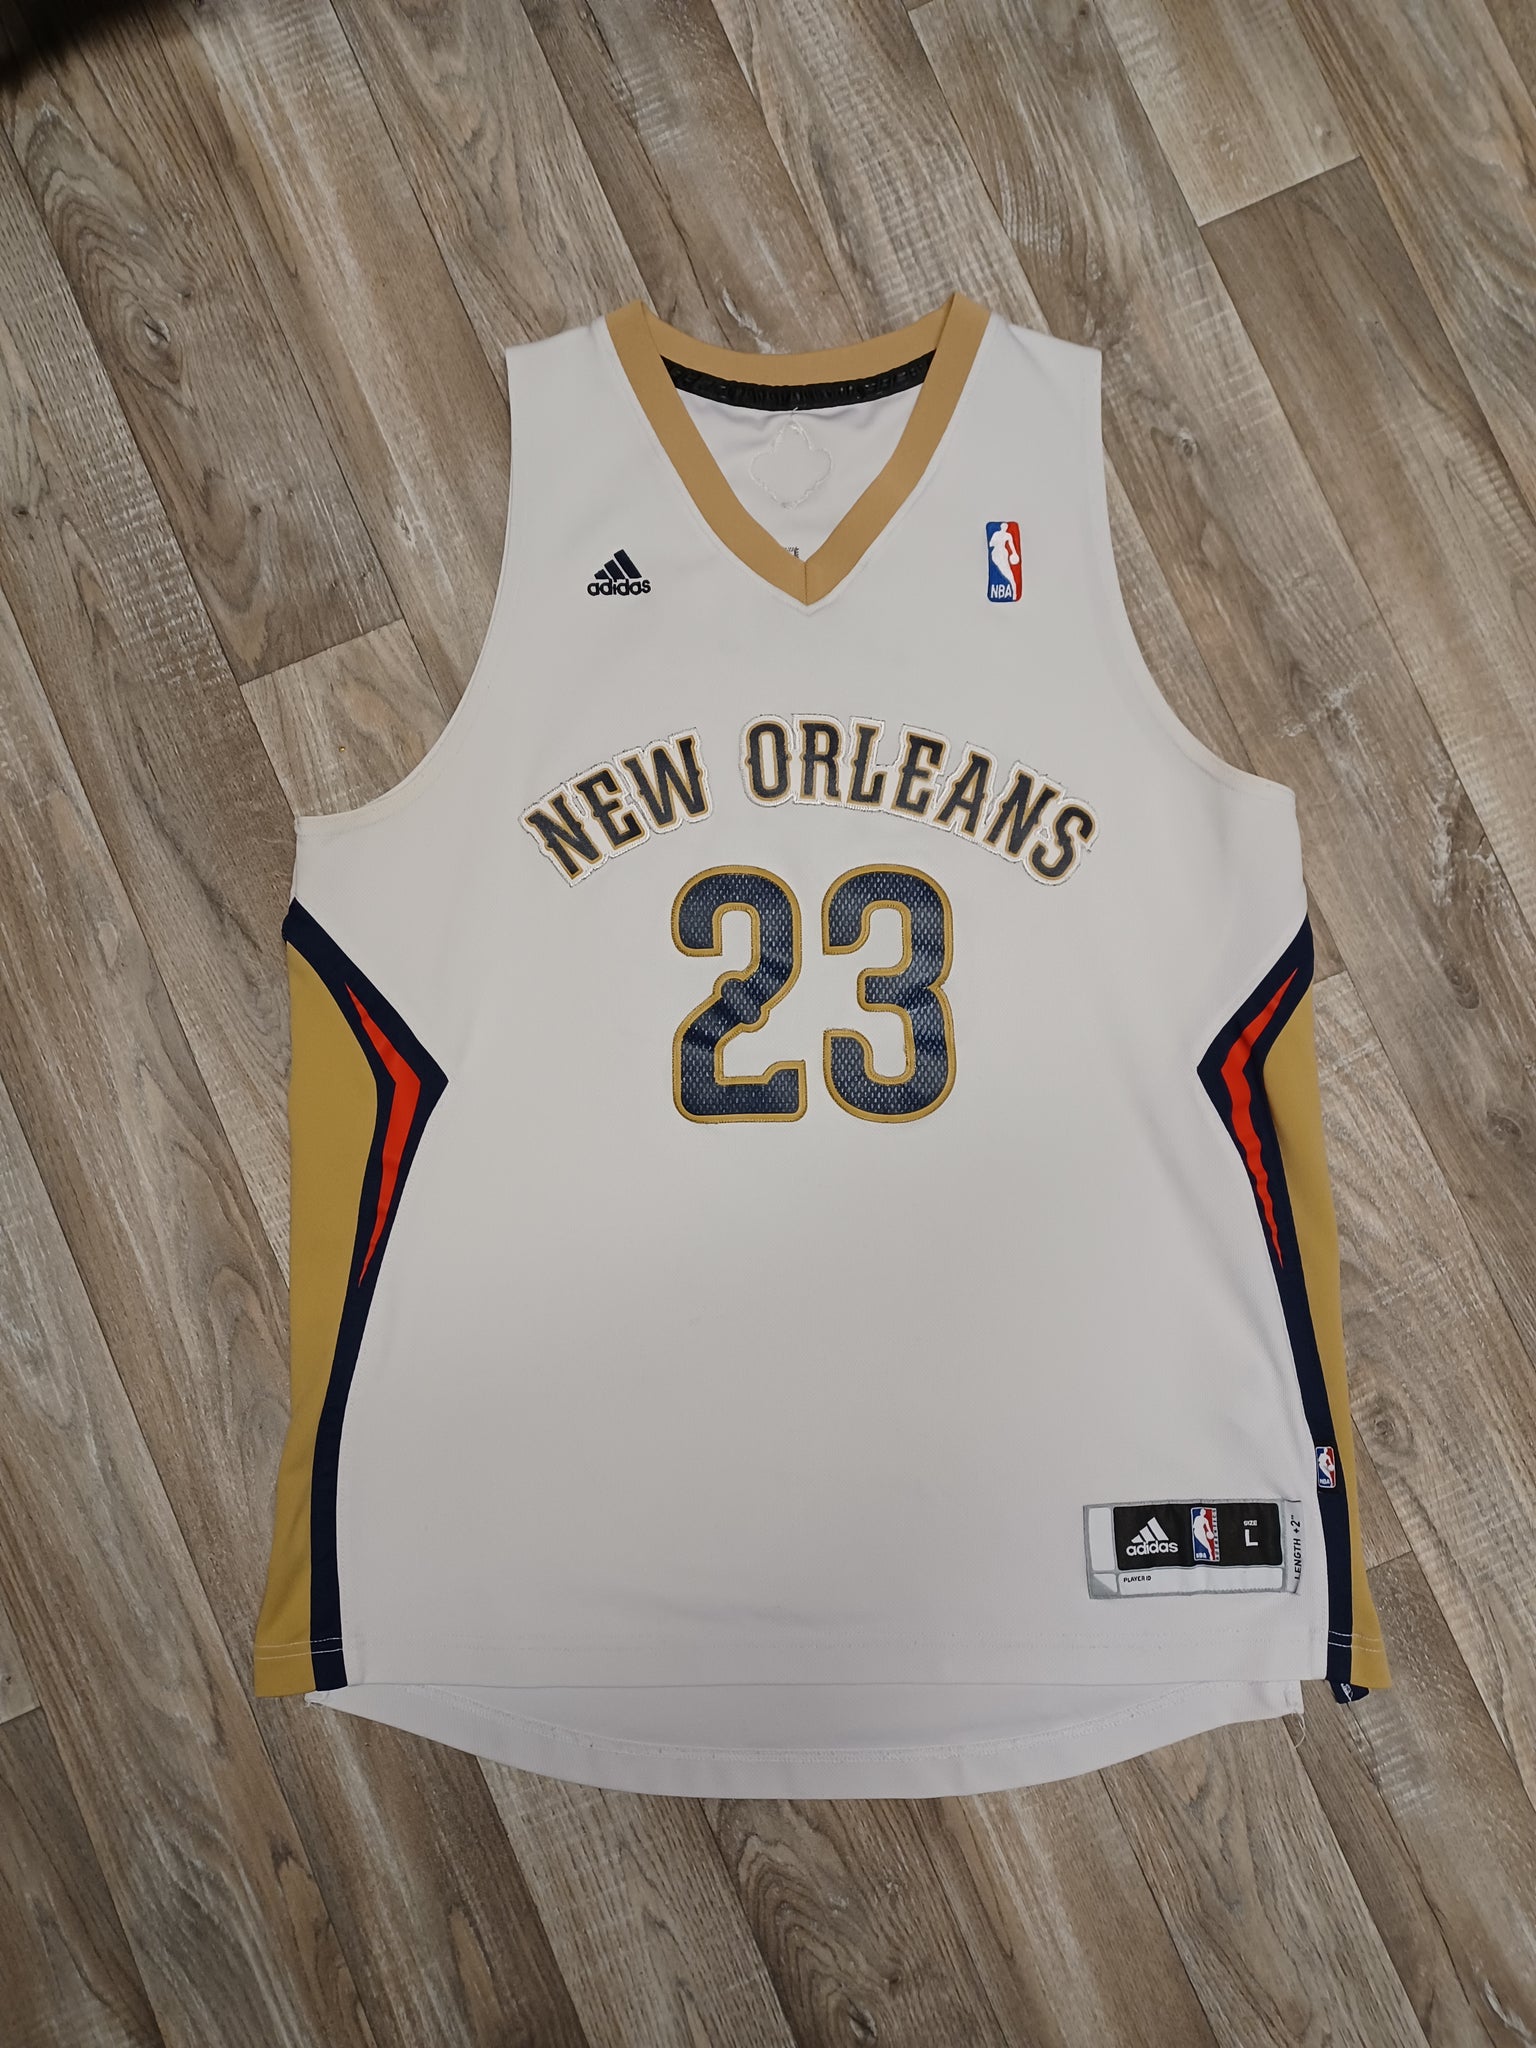 Kobe Bryant NBA All Star Game 2014 New Orleans Adidas Jersey Size